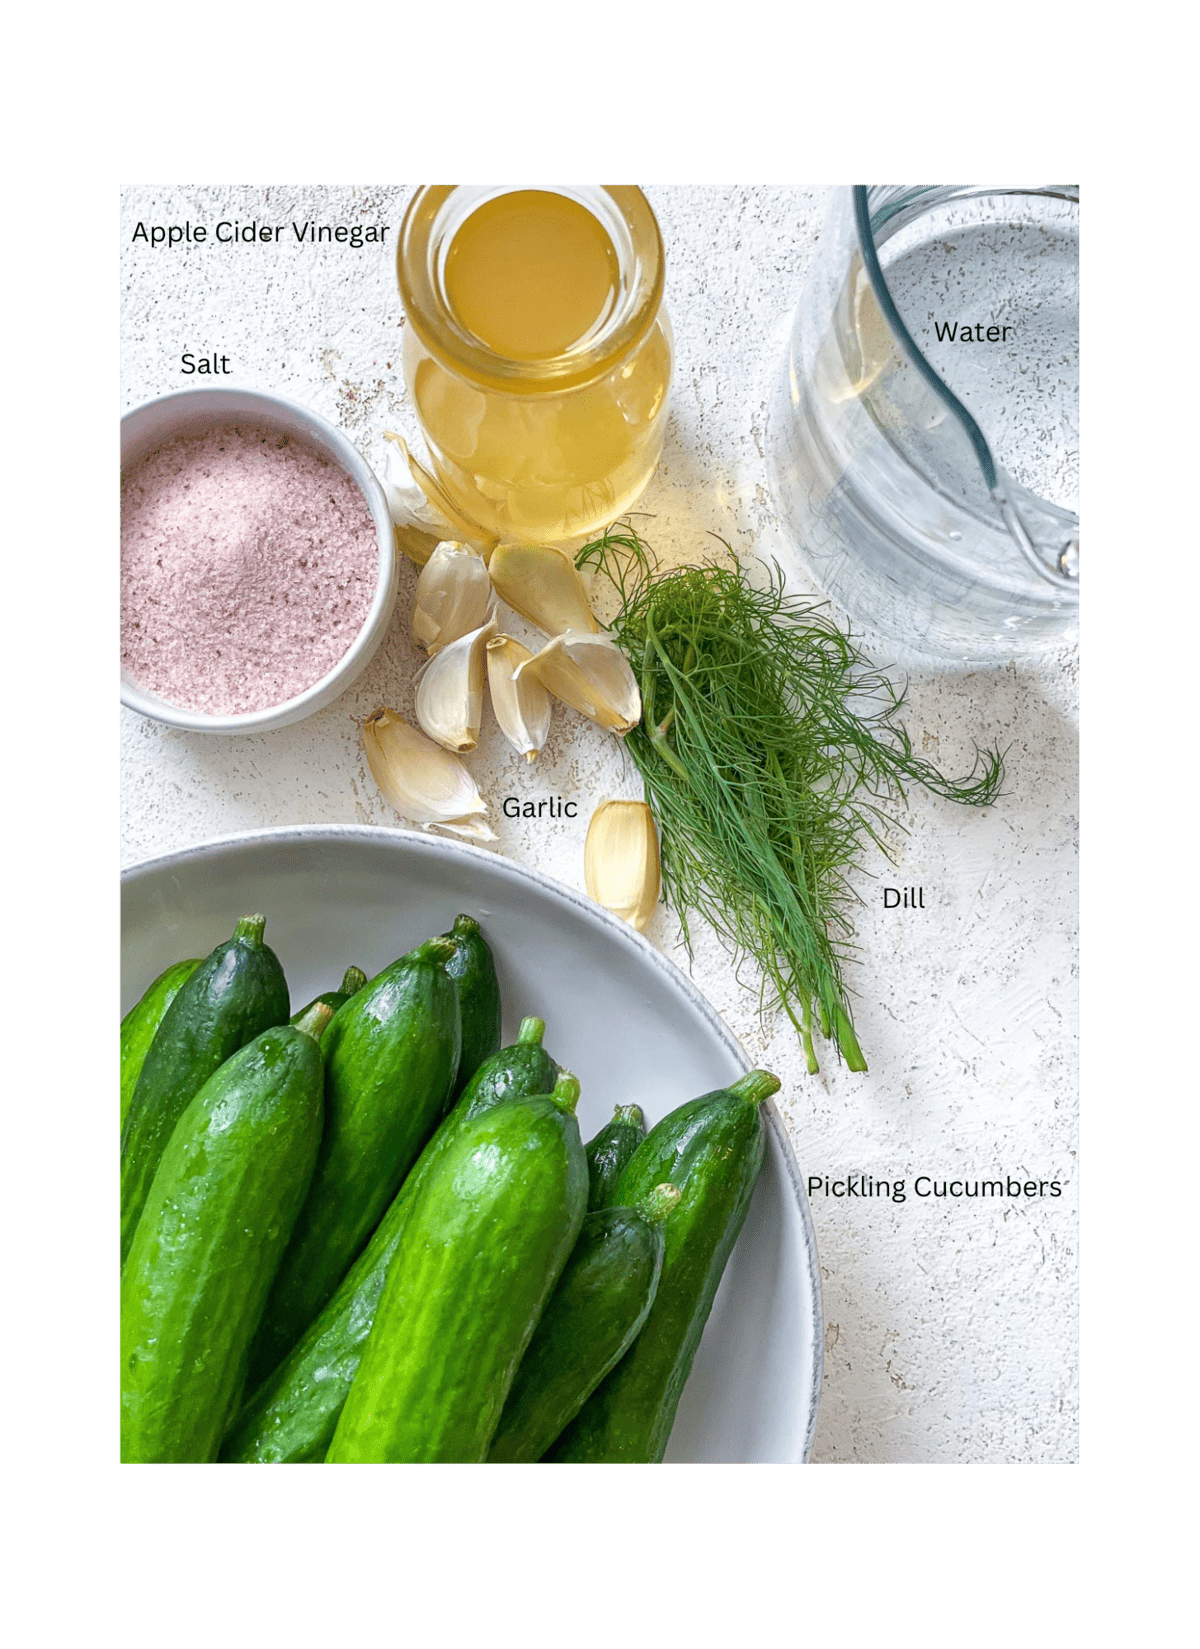 ingredients for Quick Easy Refrigerator Pickles measured out a،nst a white surface